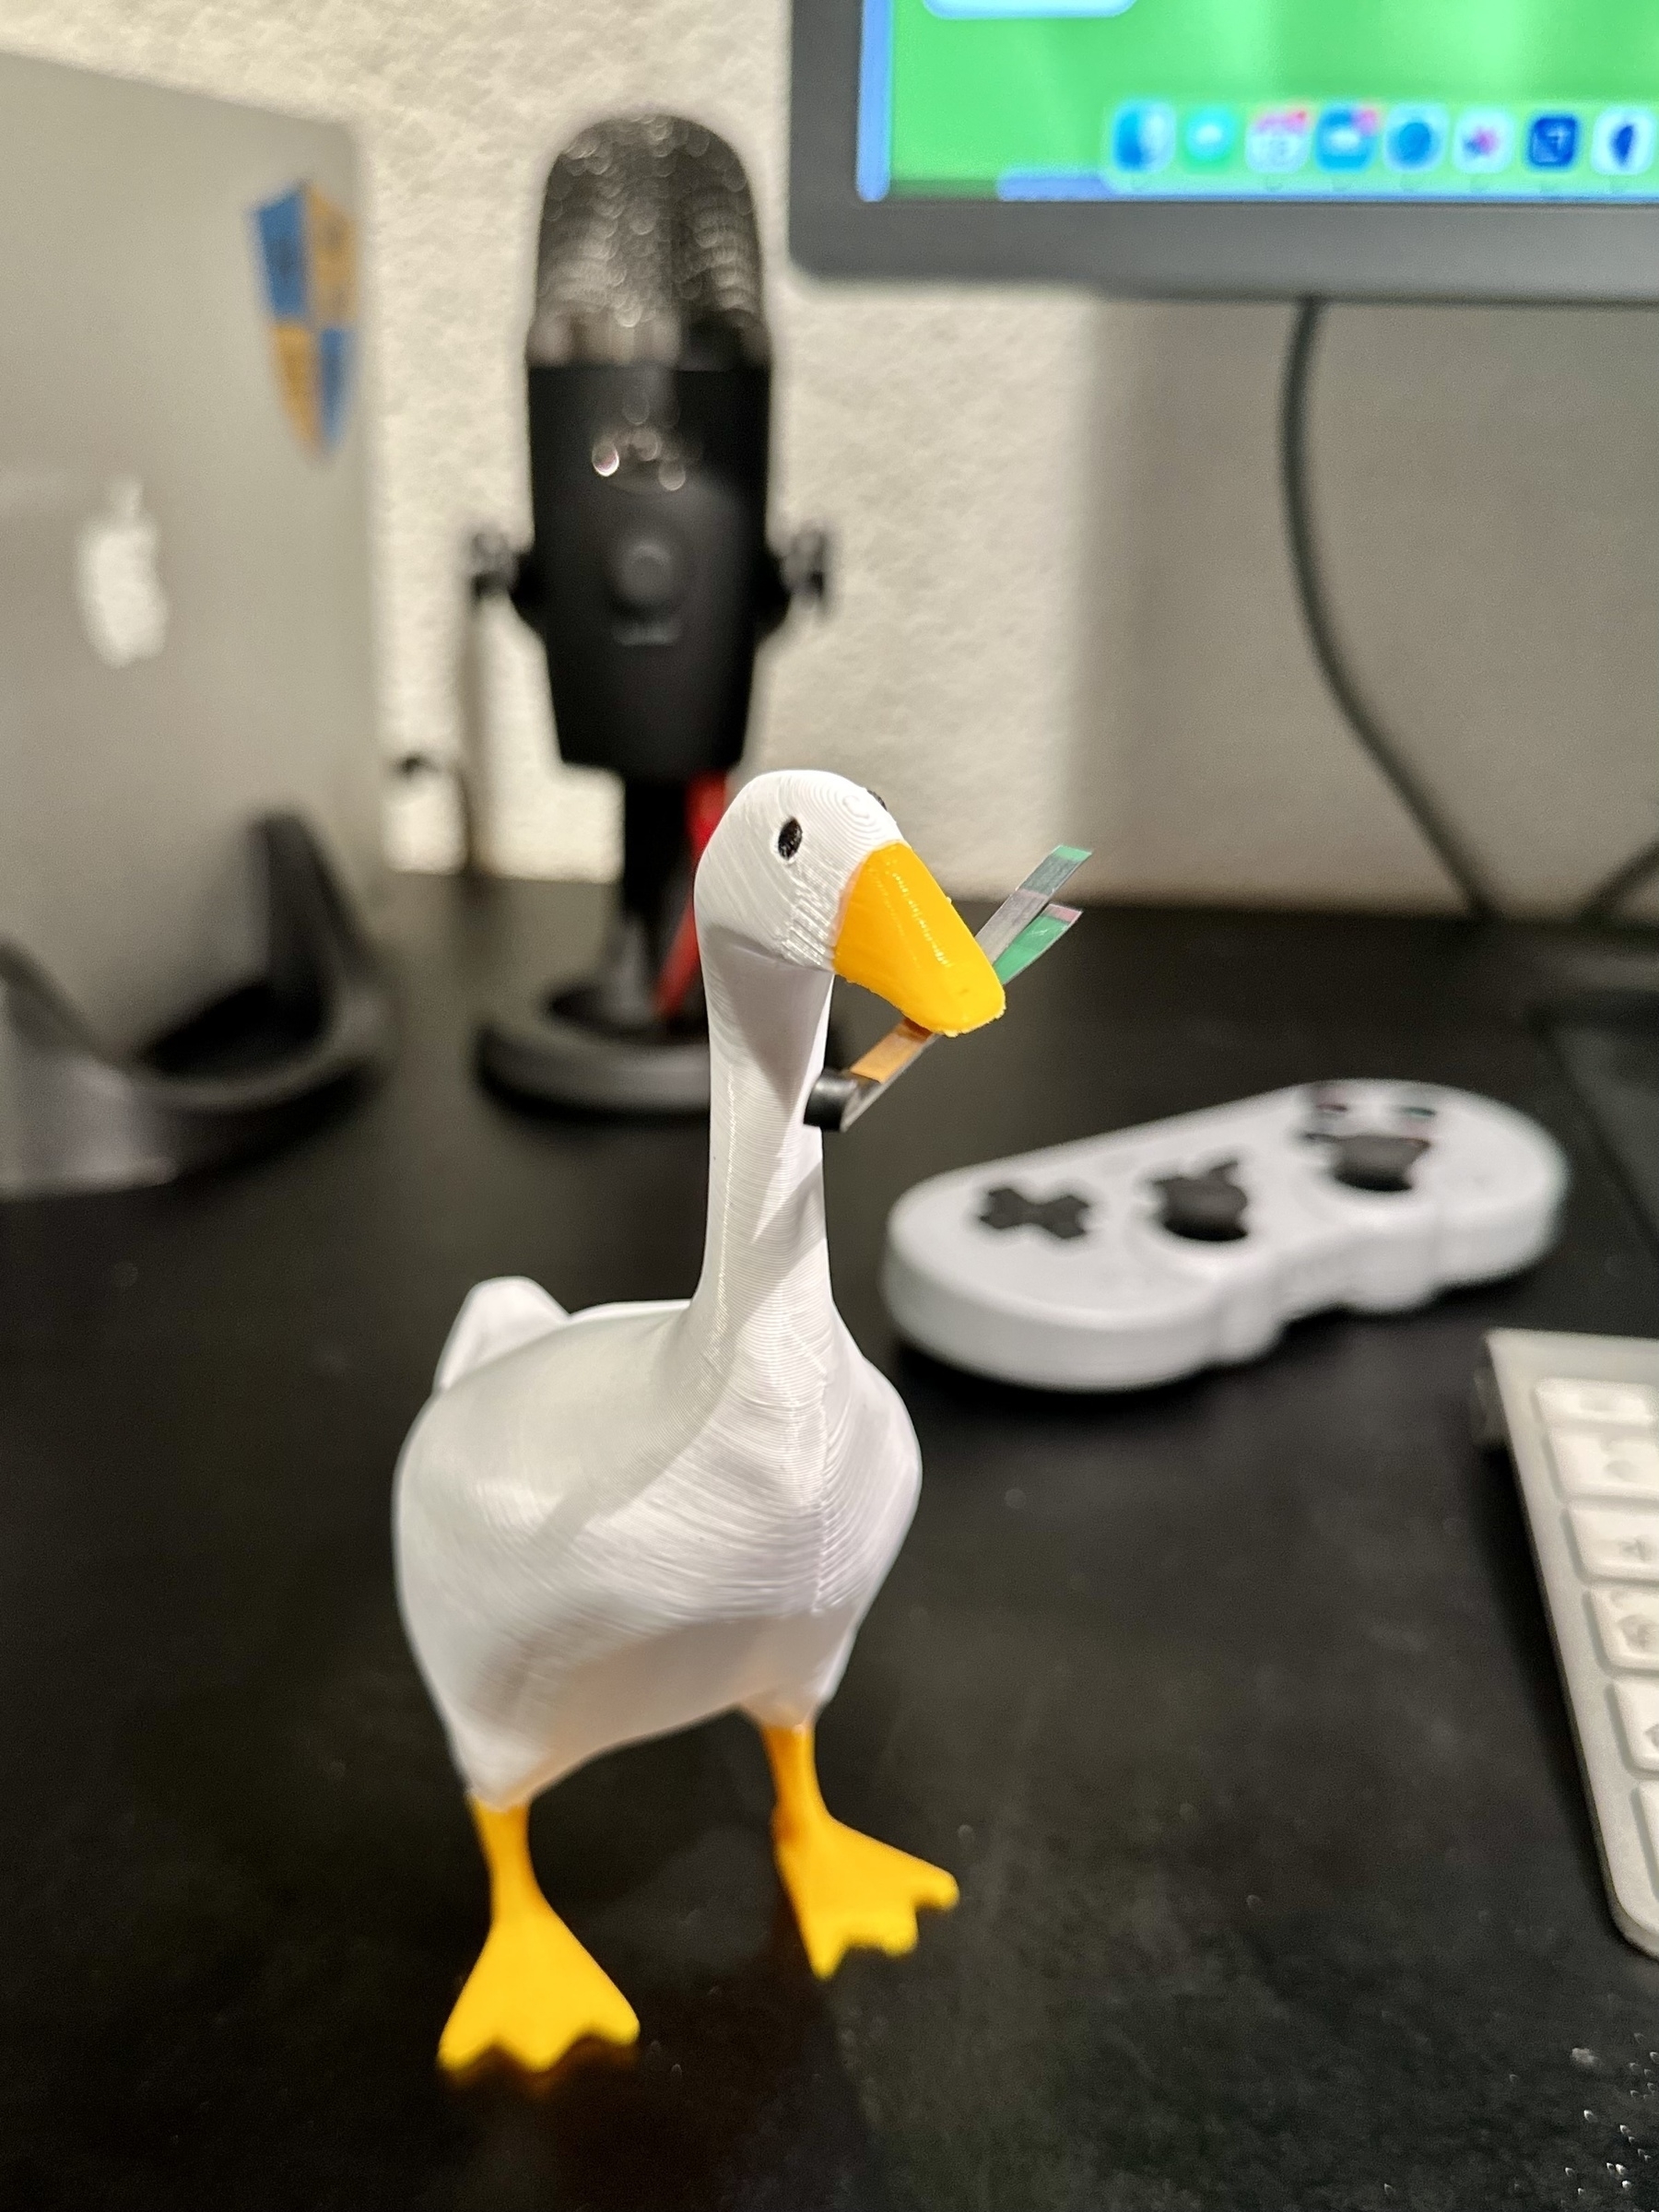 3d printed goose - reminiscent of Untitled Goose Game from Panic